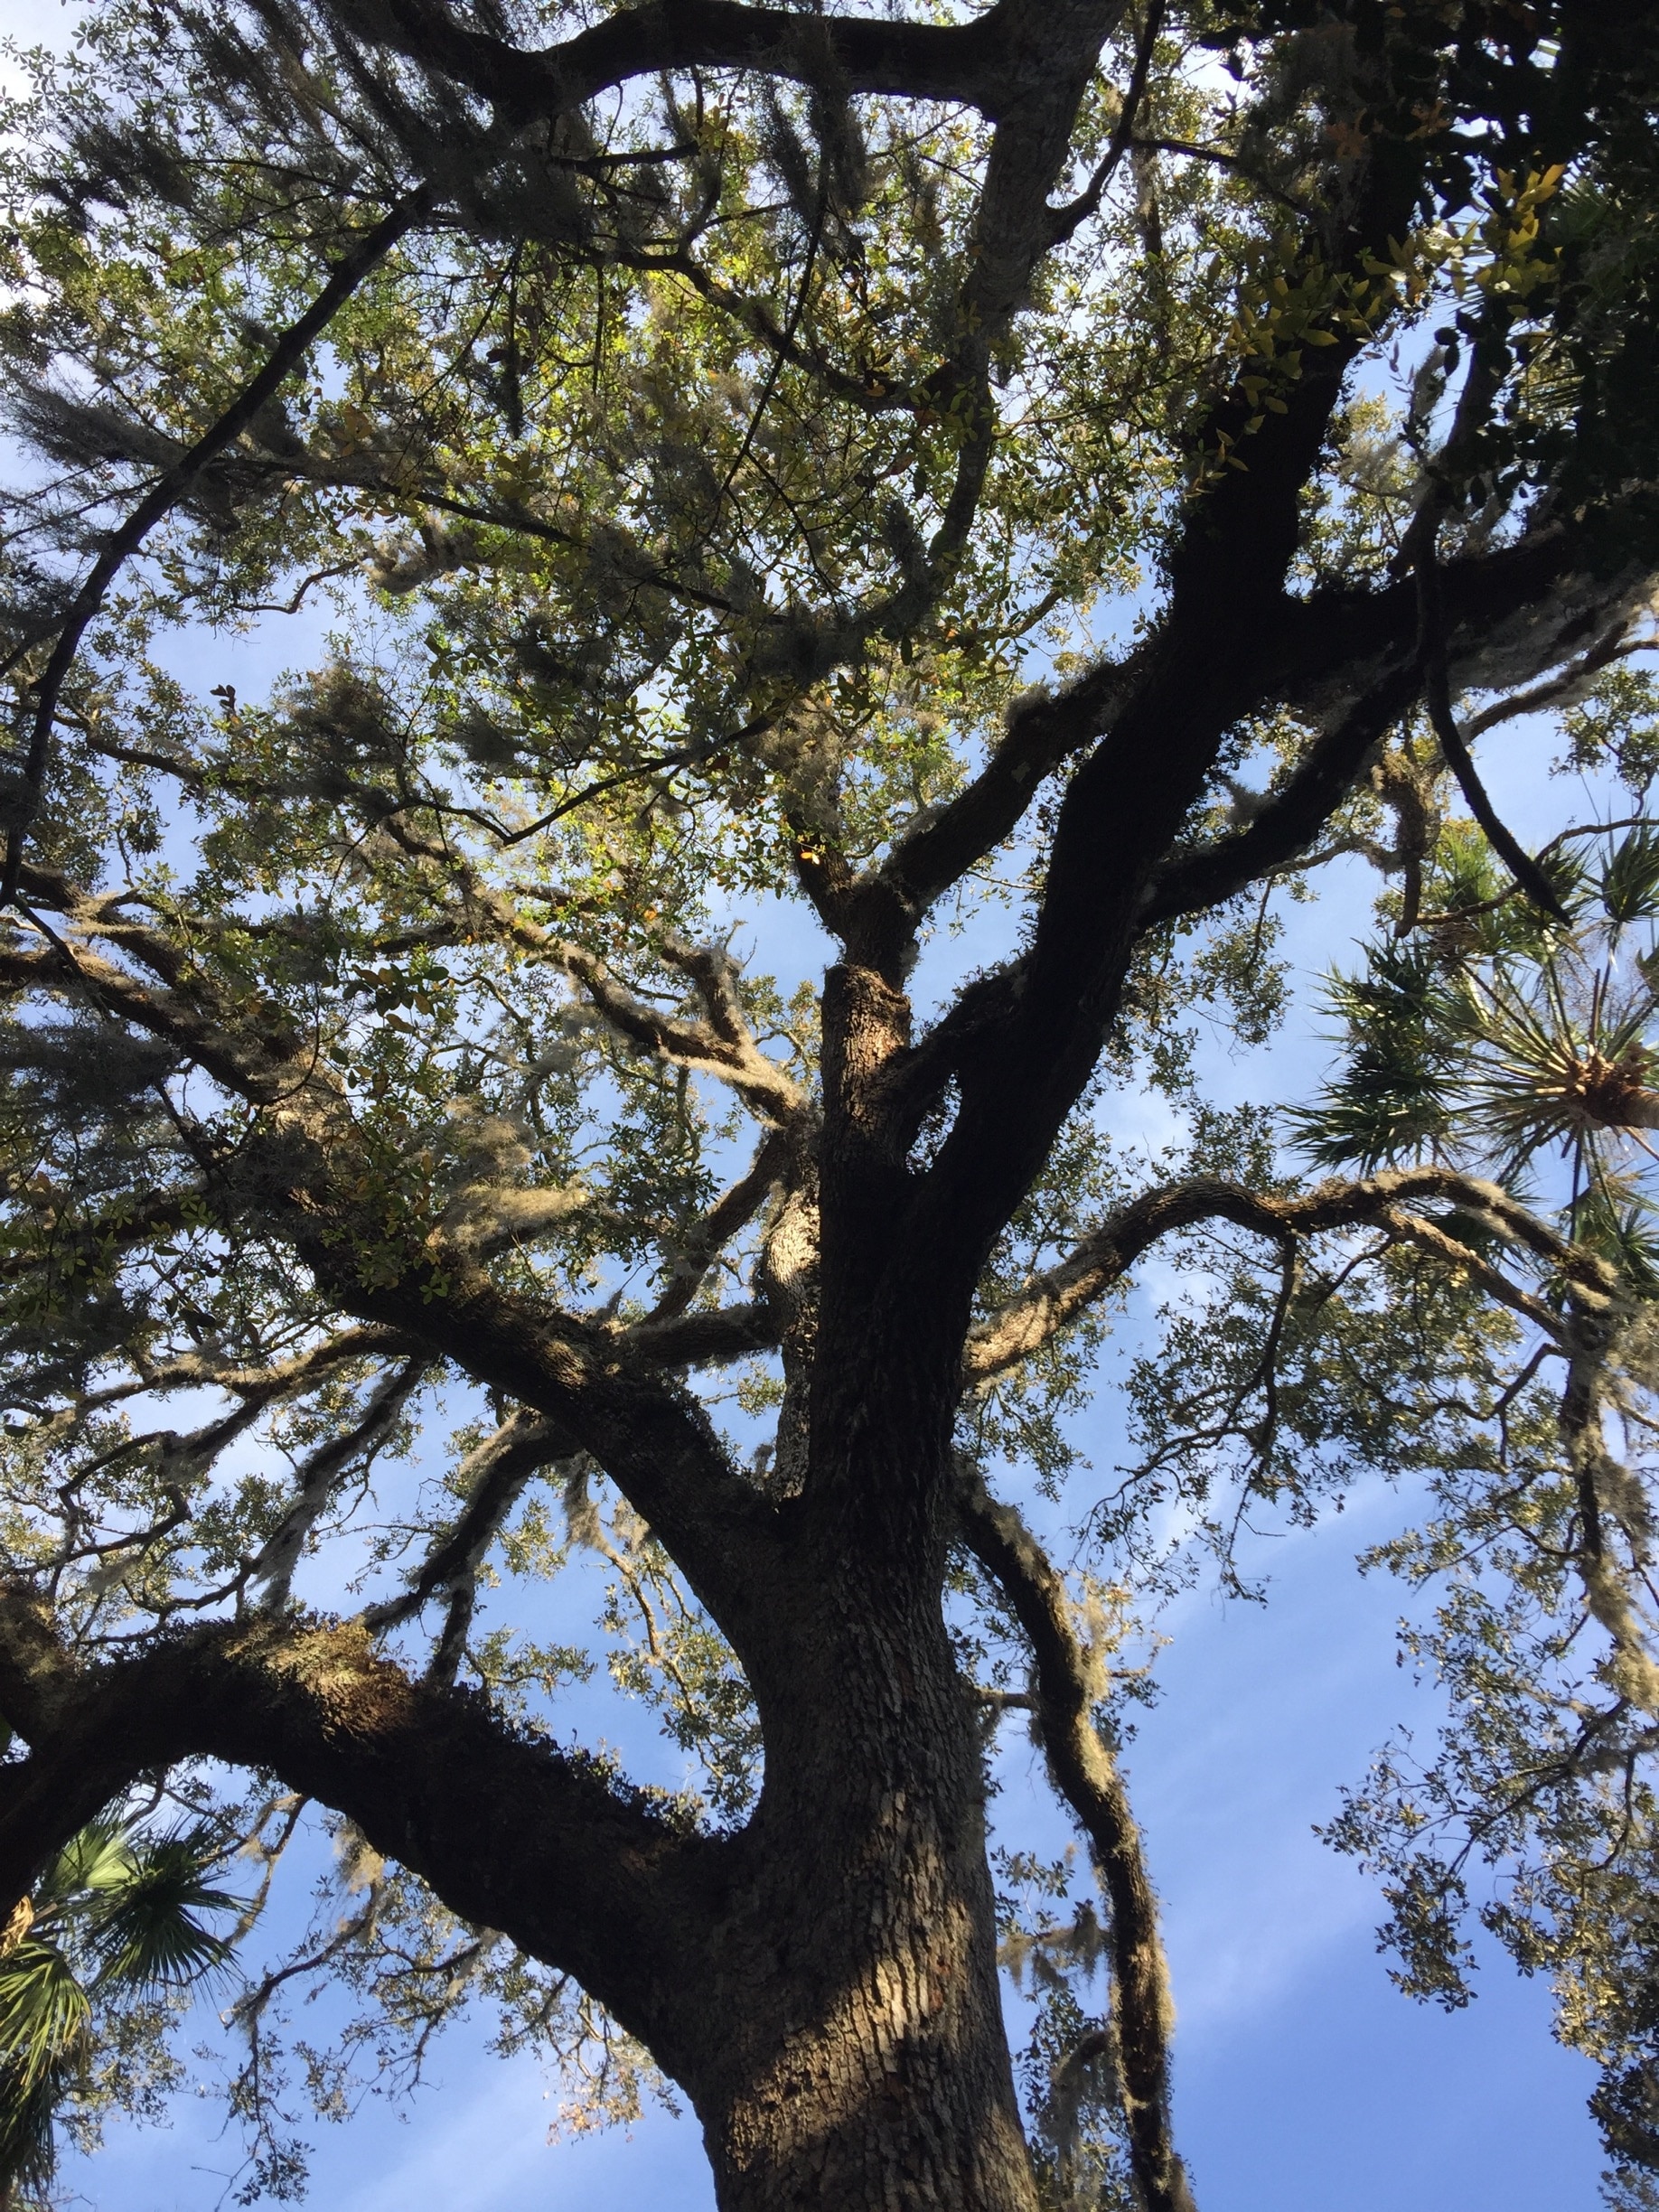 Live oak arching over the top of our RV. Park has 1.5 miles of protected Beach and the Camp sites are tucked into the lush vegetation. It feels very private. Fantastic weather in March. 